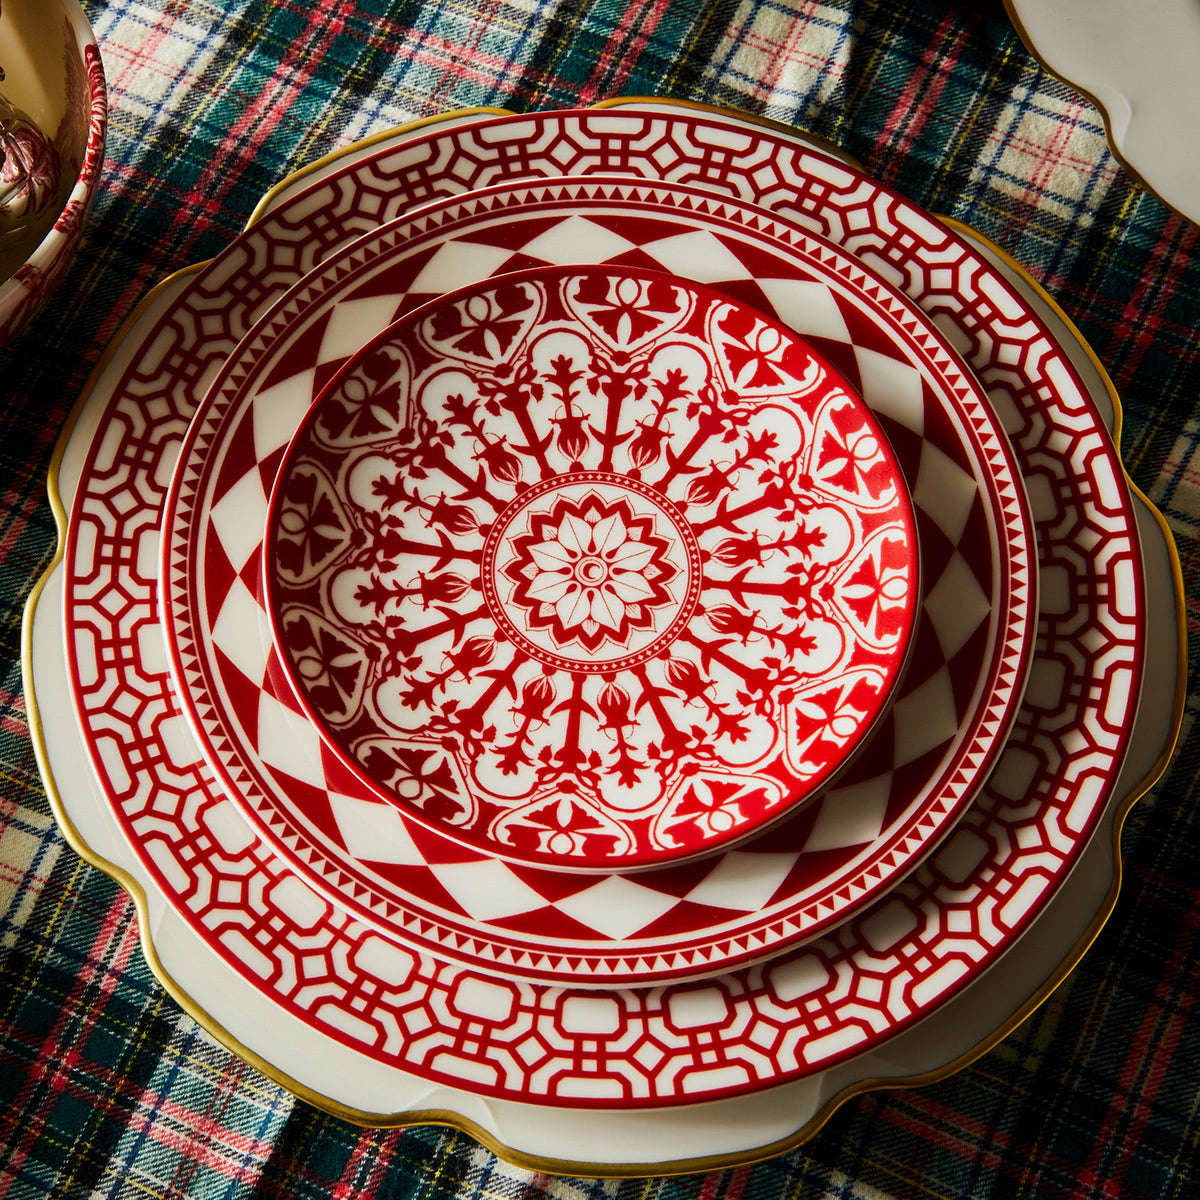 A red and white Grace Gold Dinner Plate by Caskata Artisanal Home on a polished table.